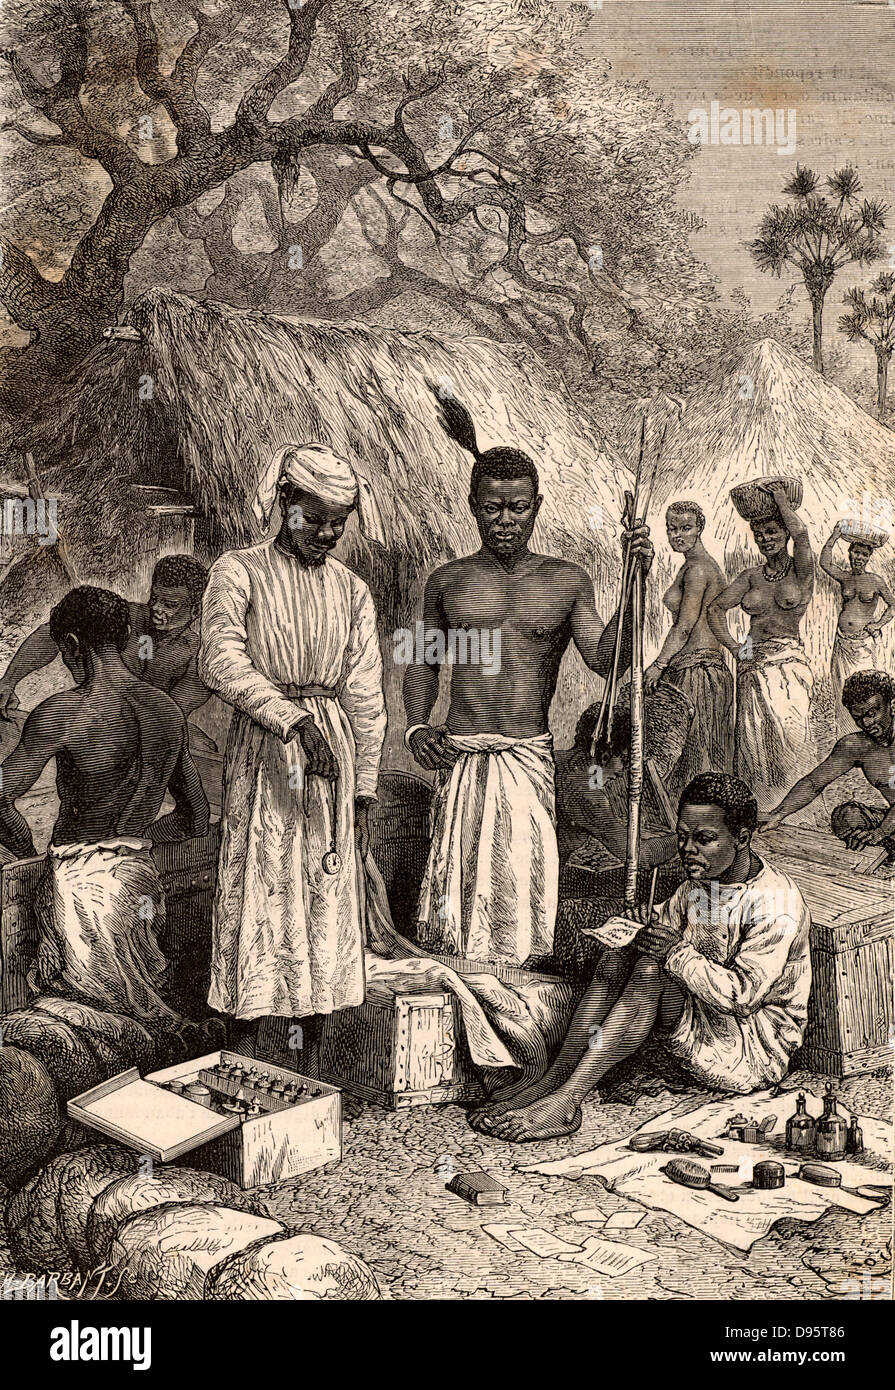 The African attendants of David Livingstone (1813-1873) Scottish missionary and explorer of Africa.  Livingstone's African attendants Souzi, Chouma and Jacob Wainwright, making an inventory of his possessions after his death.  Engraving from 'Le Journal de la Jeunesse' (Paris, c1877). Stock Photo